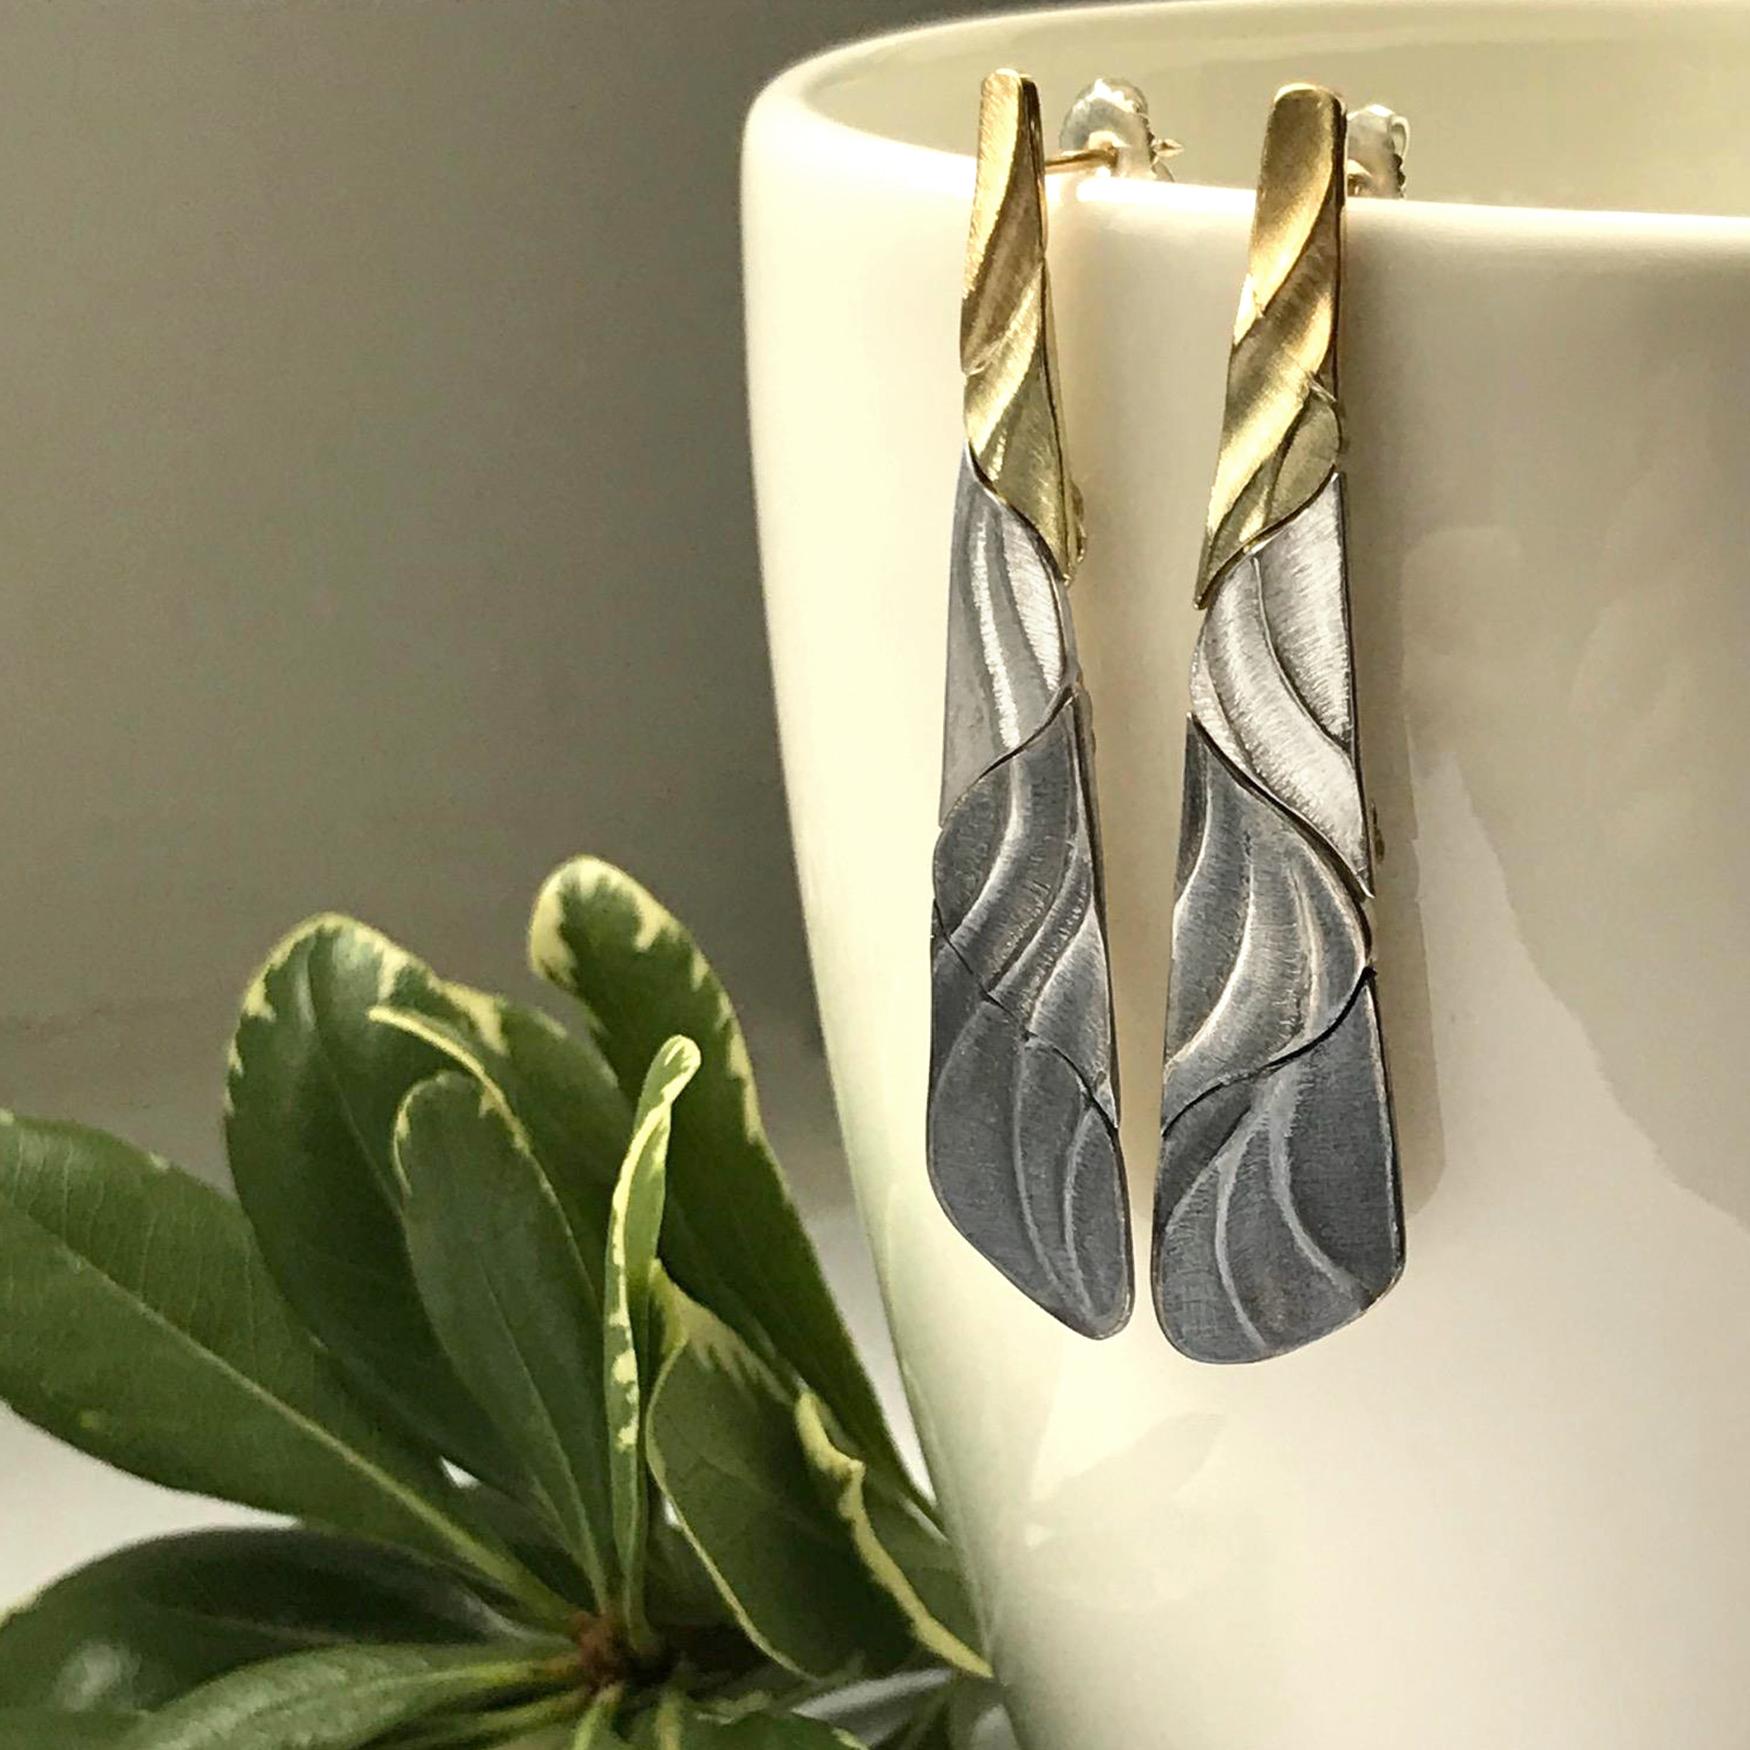 Ombre is the blending or shading of one color hue into another. K.MITA’s Ombre Earrings, which are 54 x 12mm and have two hinges to enhance movement, blend Argentium and Oxidized Silver with 18k Yellow Gold and 14k Green Gold to create the effect of